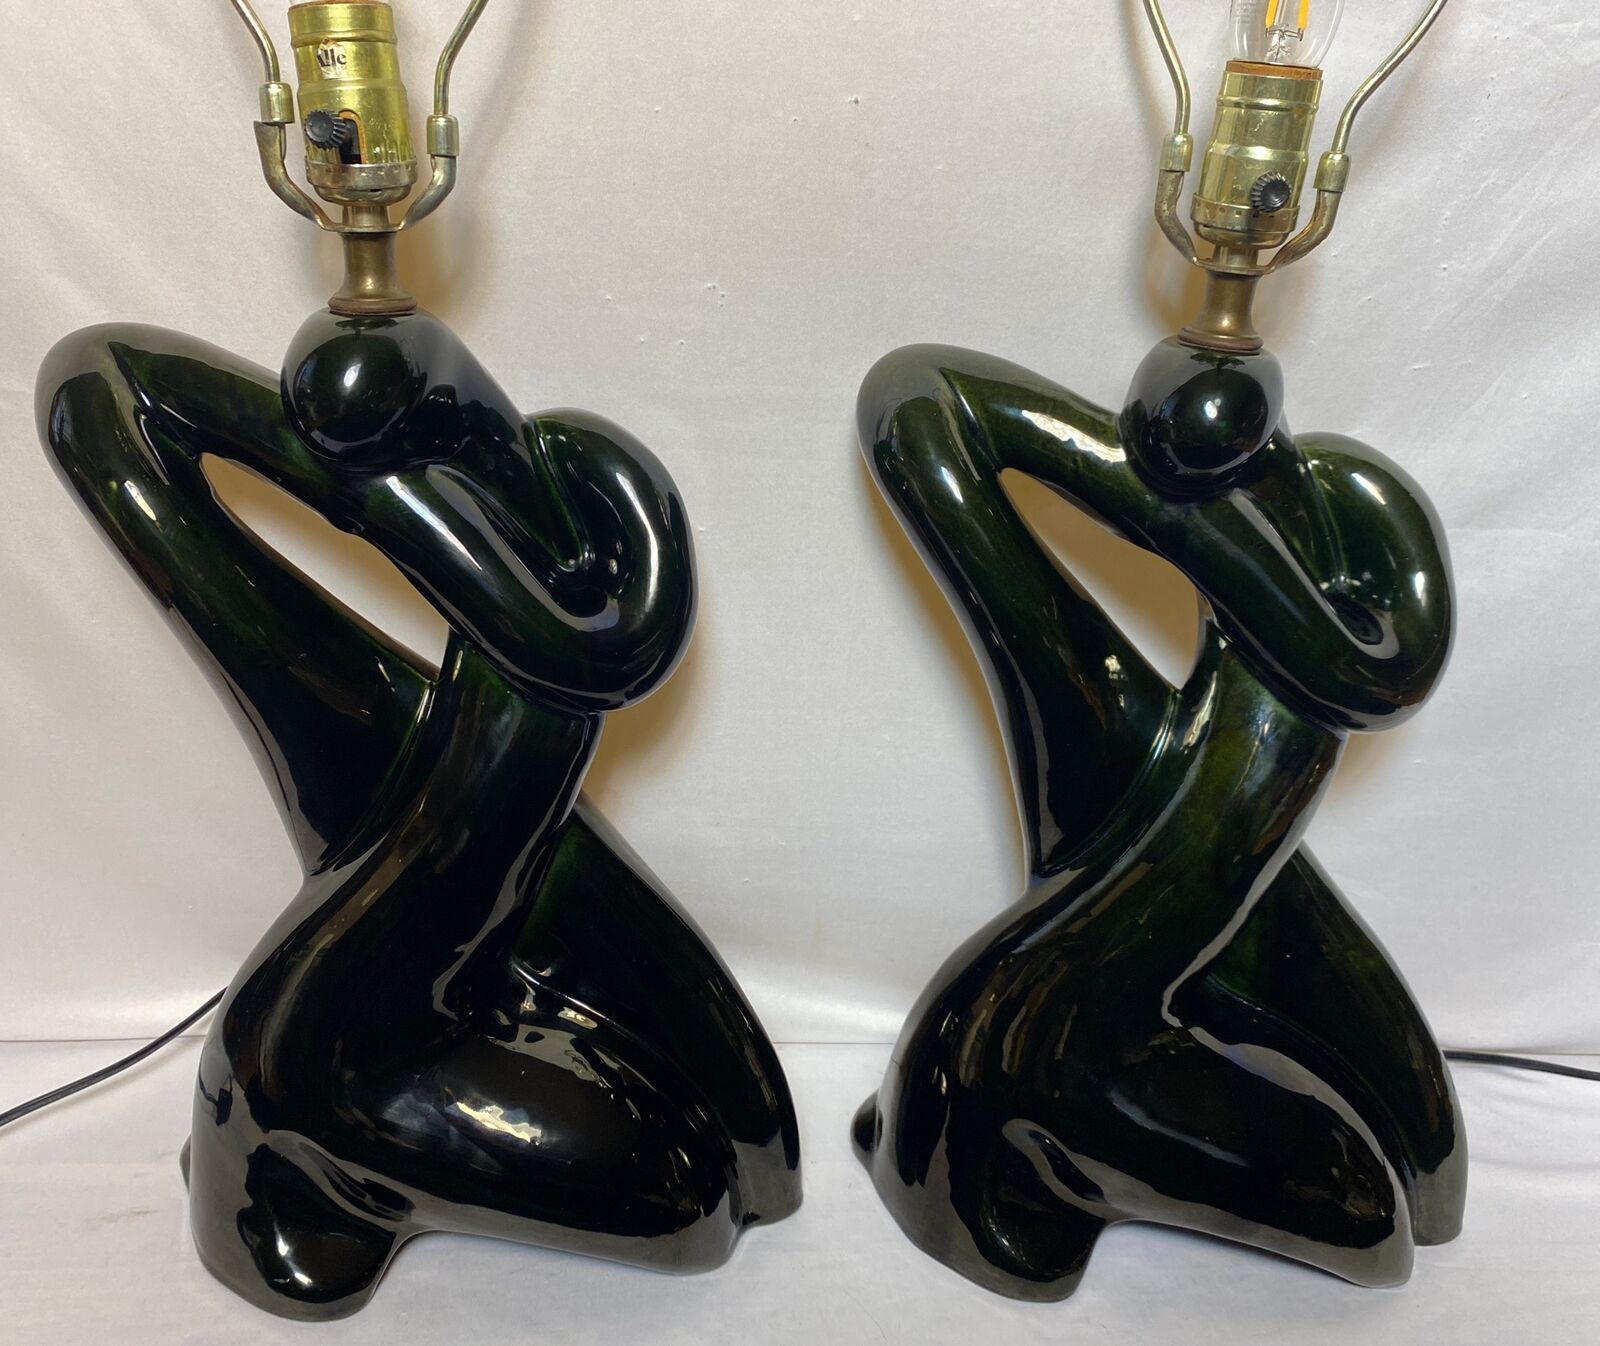 Vintage Pair of Mid Century Ceramic Table Lamps Abstract Freeform Figures Black